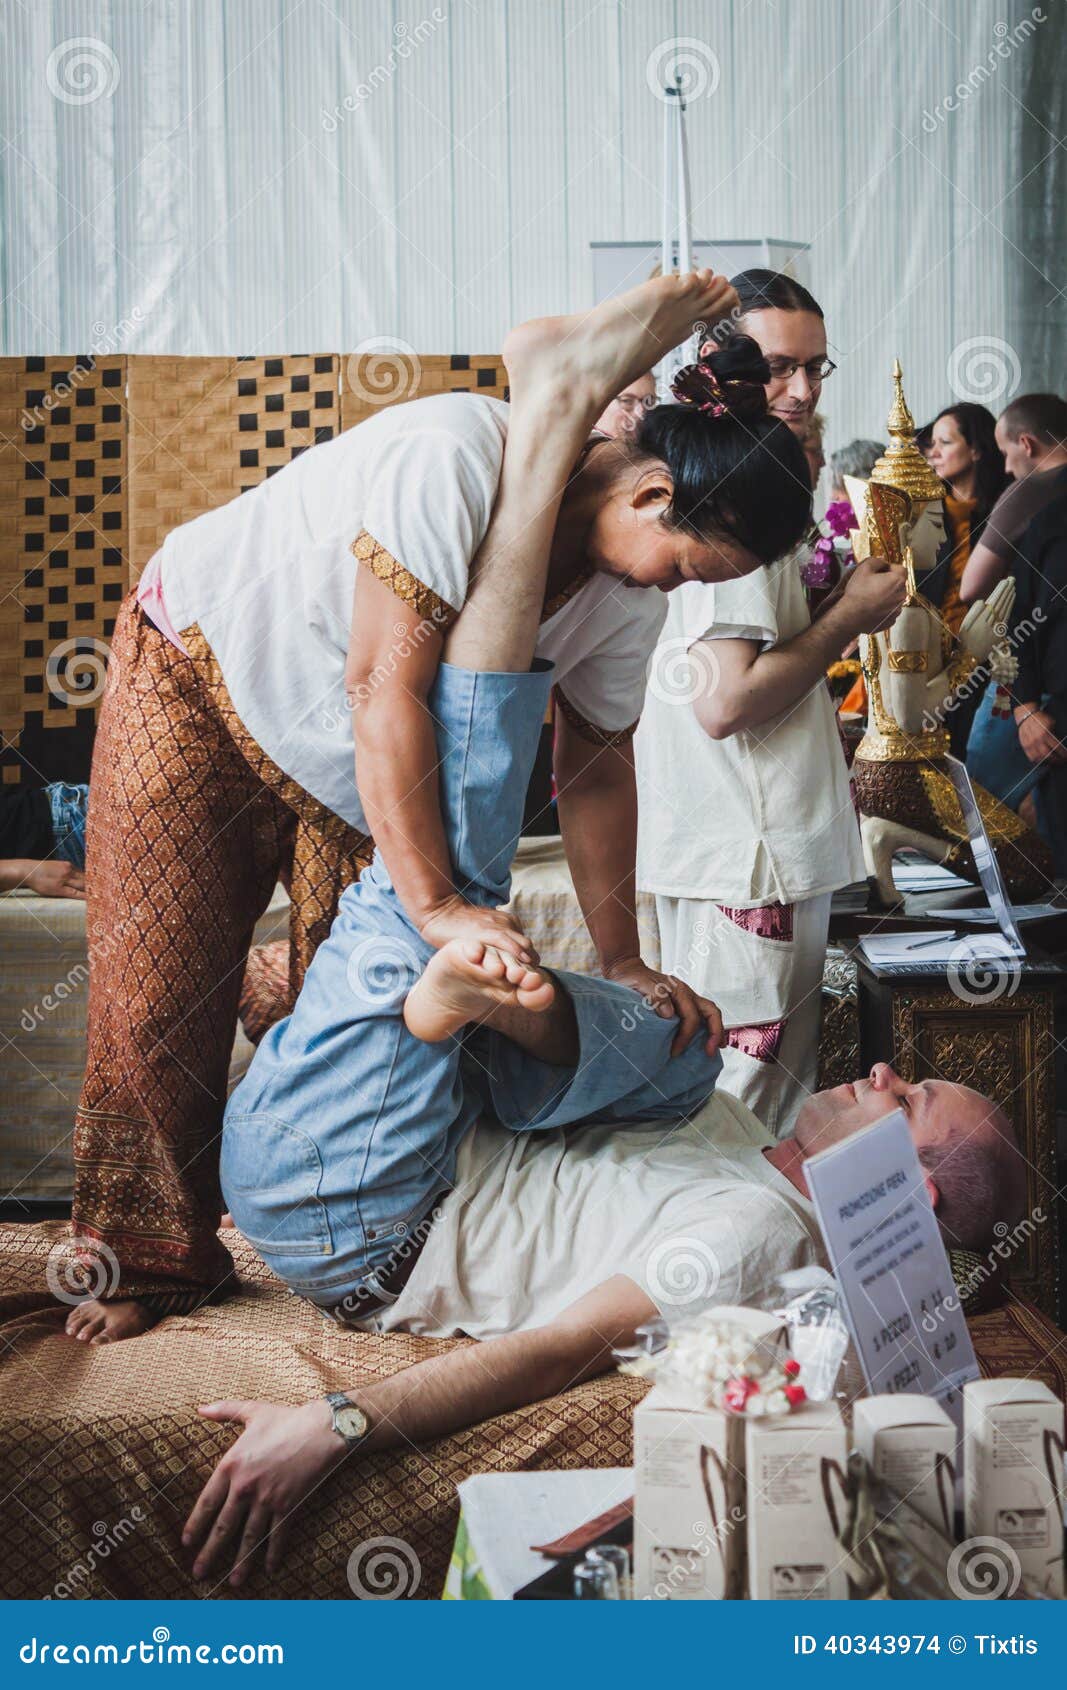 Thai Massage At Orient Festival In Milan Italy Editorial Stock Image Image Of China Cultural